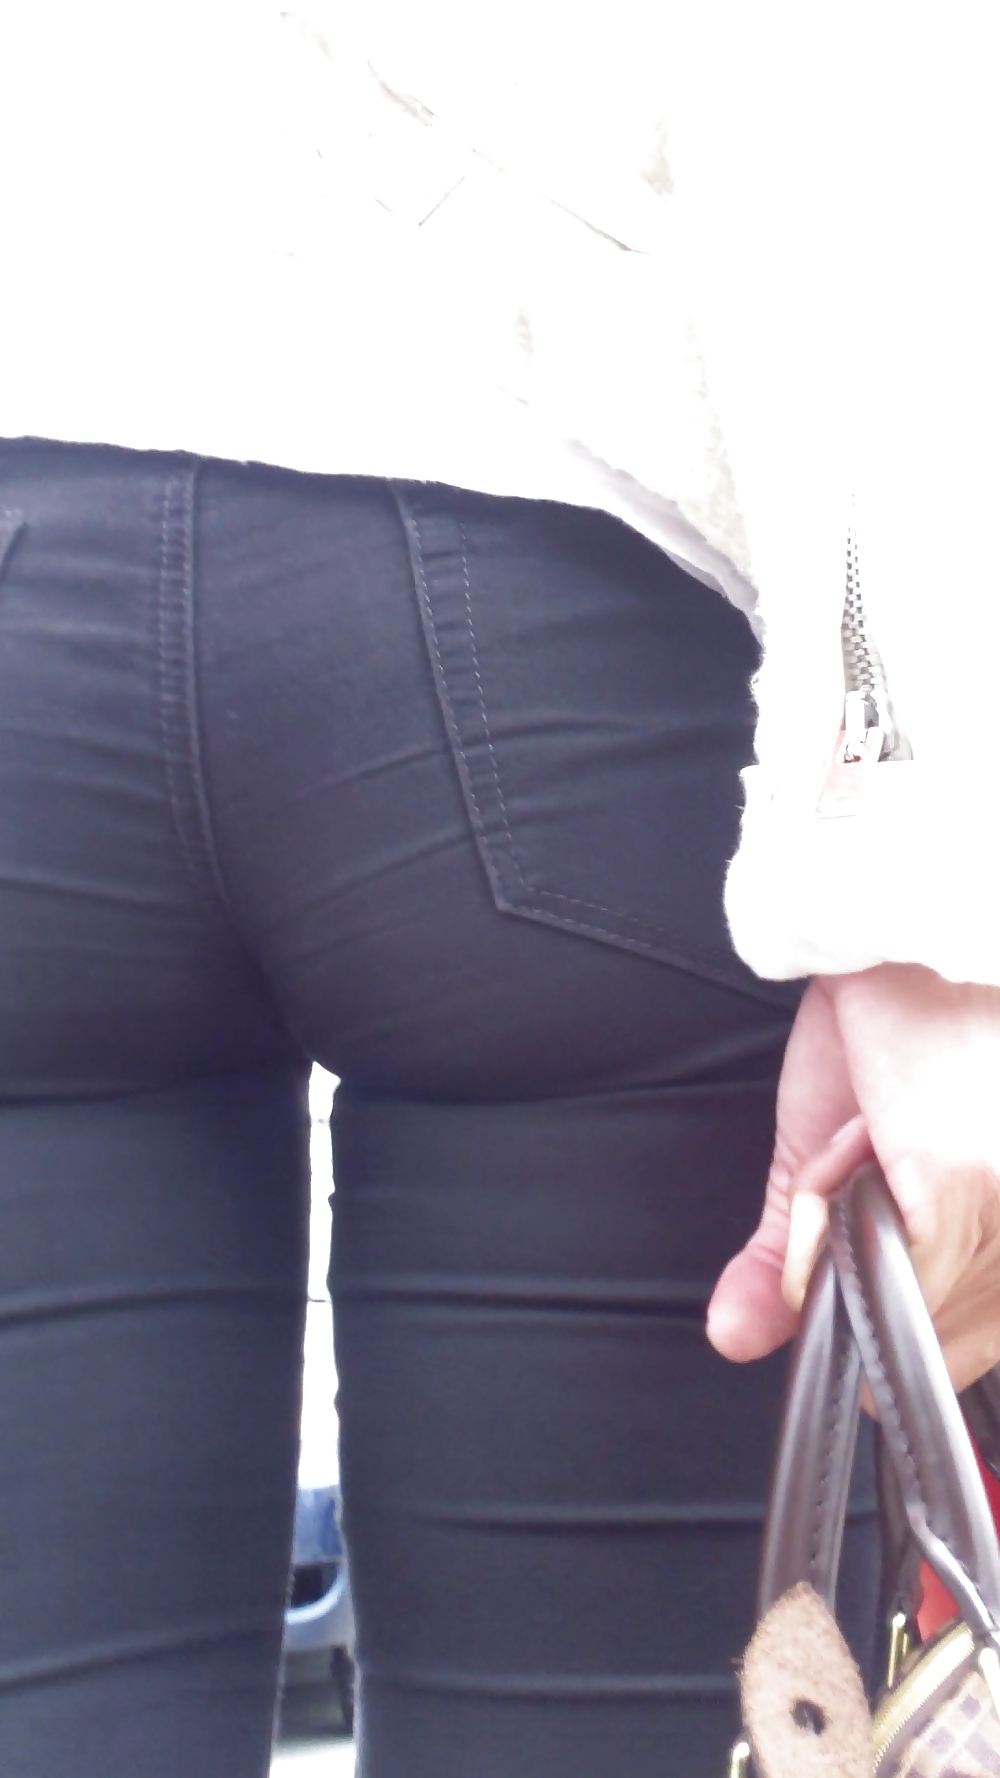 Tight teen butts & ass in jeans up close  #20660430